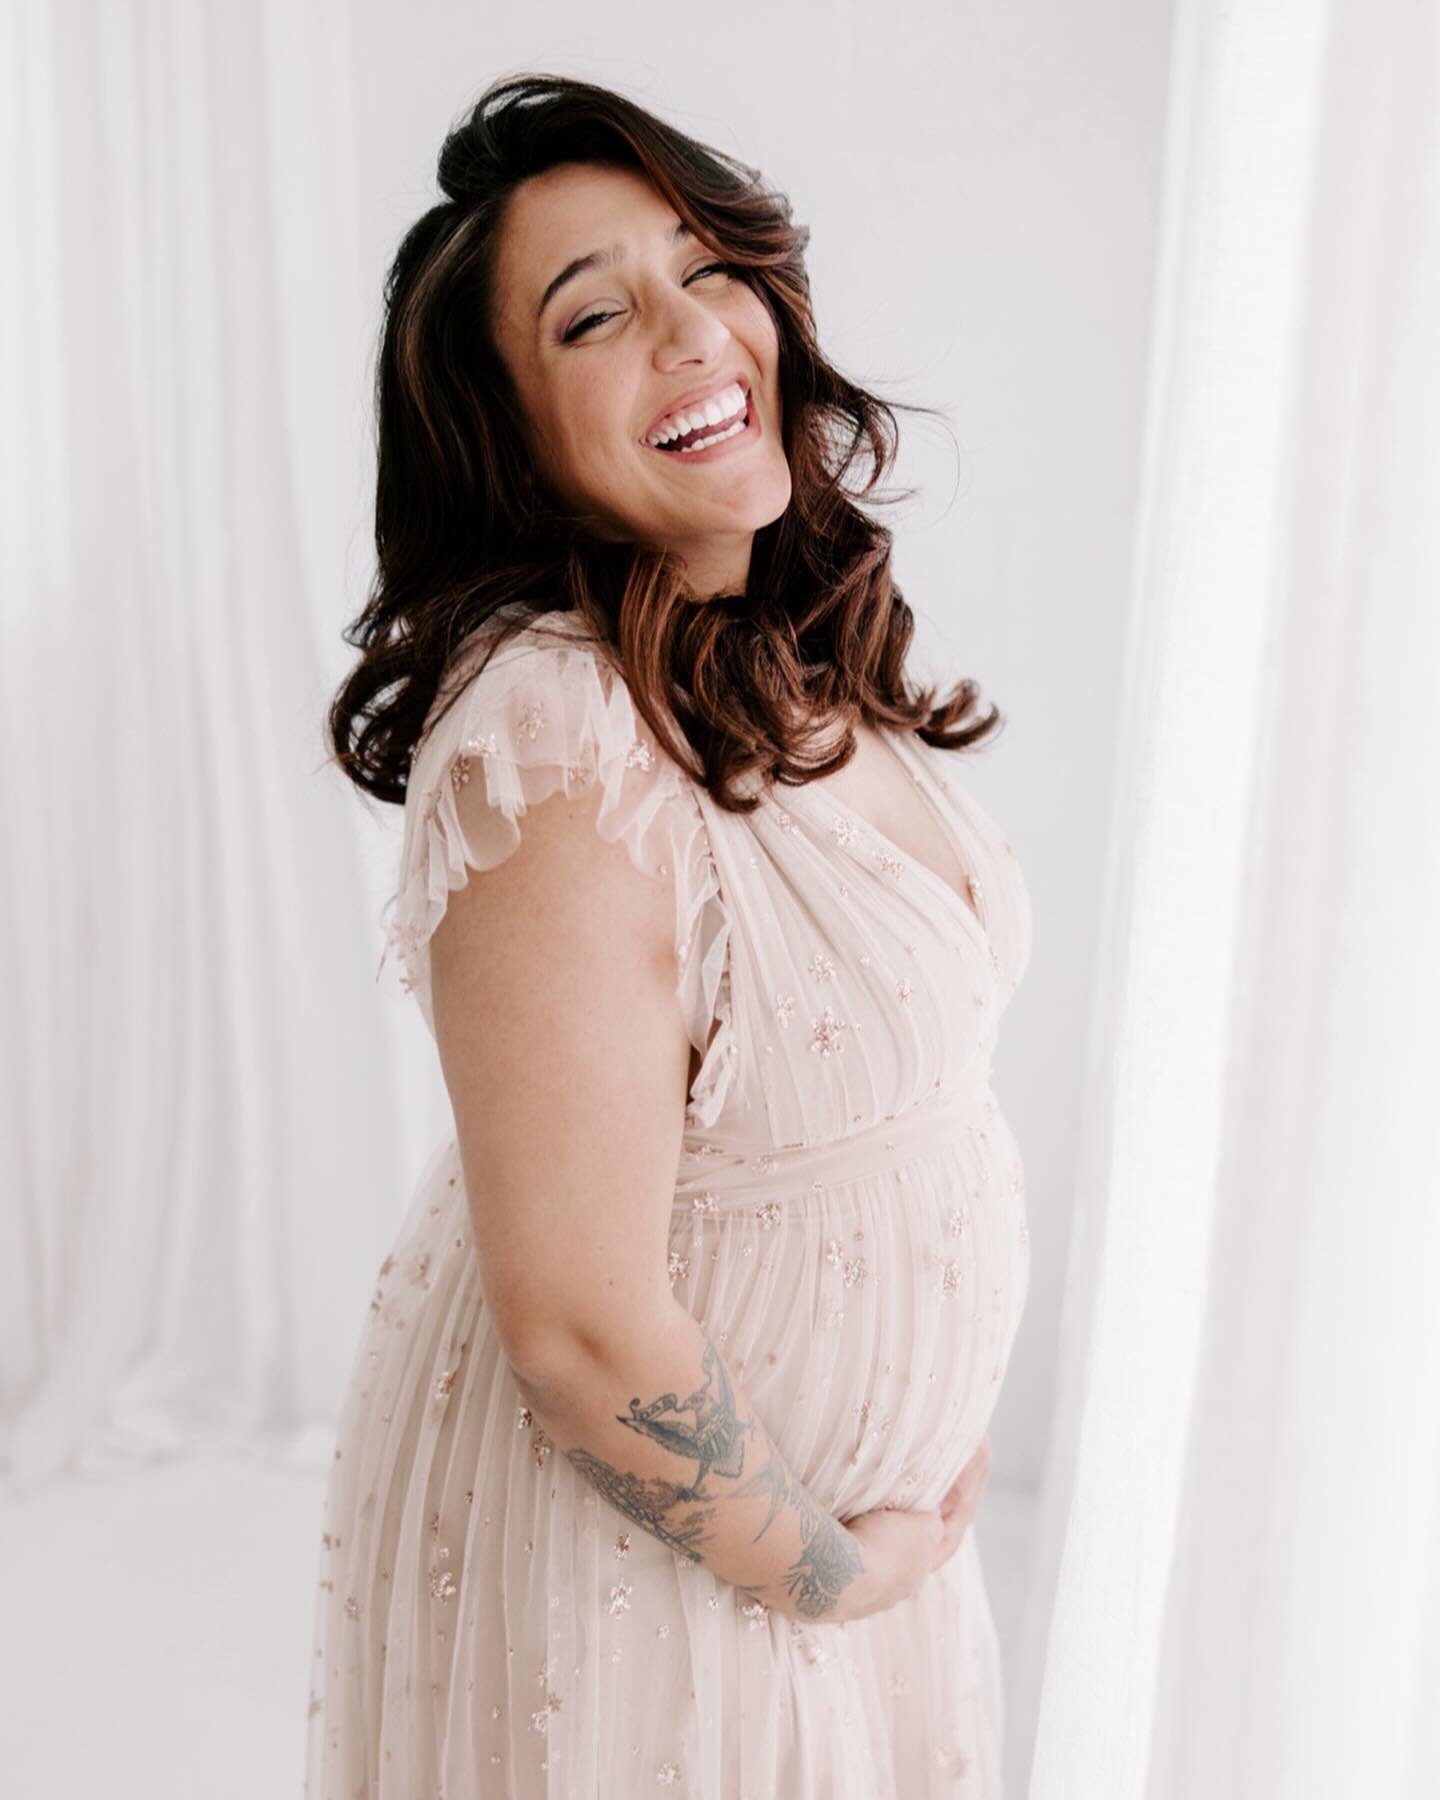 ✨GOLDEN BIRTHDAY✨

I had all kinds of ideas of what this season of my life would look like. I could have never imagined how special it would be/ could be. I&rsquo;m so excited to start my 30s.

30/30/30

Turning 30 on the 30th at 30weeks pregnant. 

